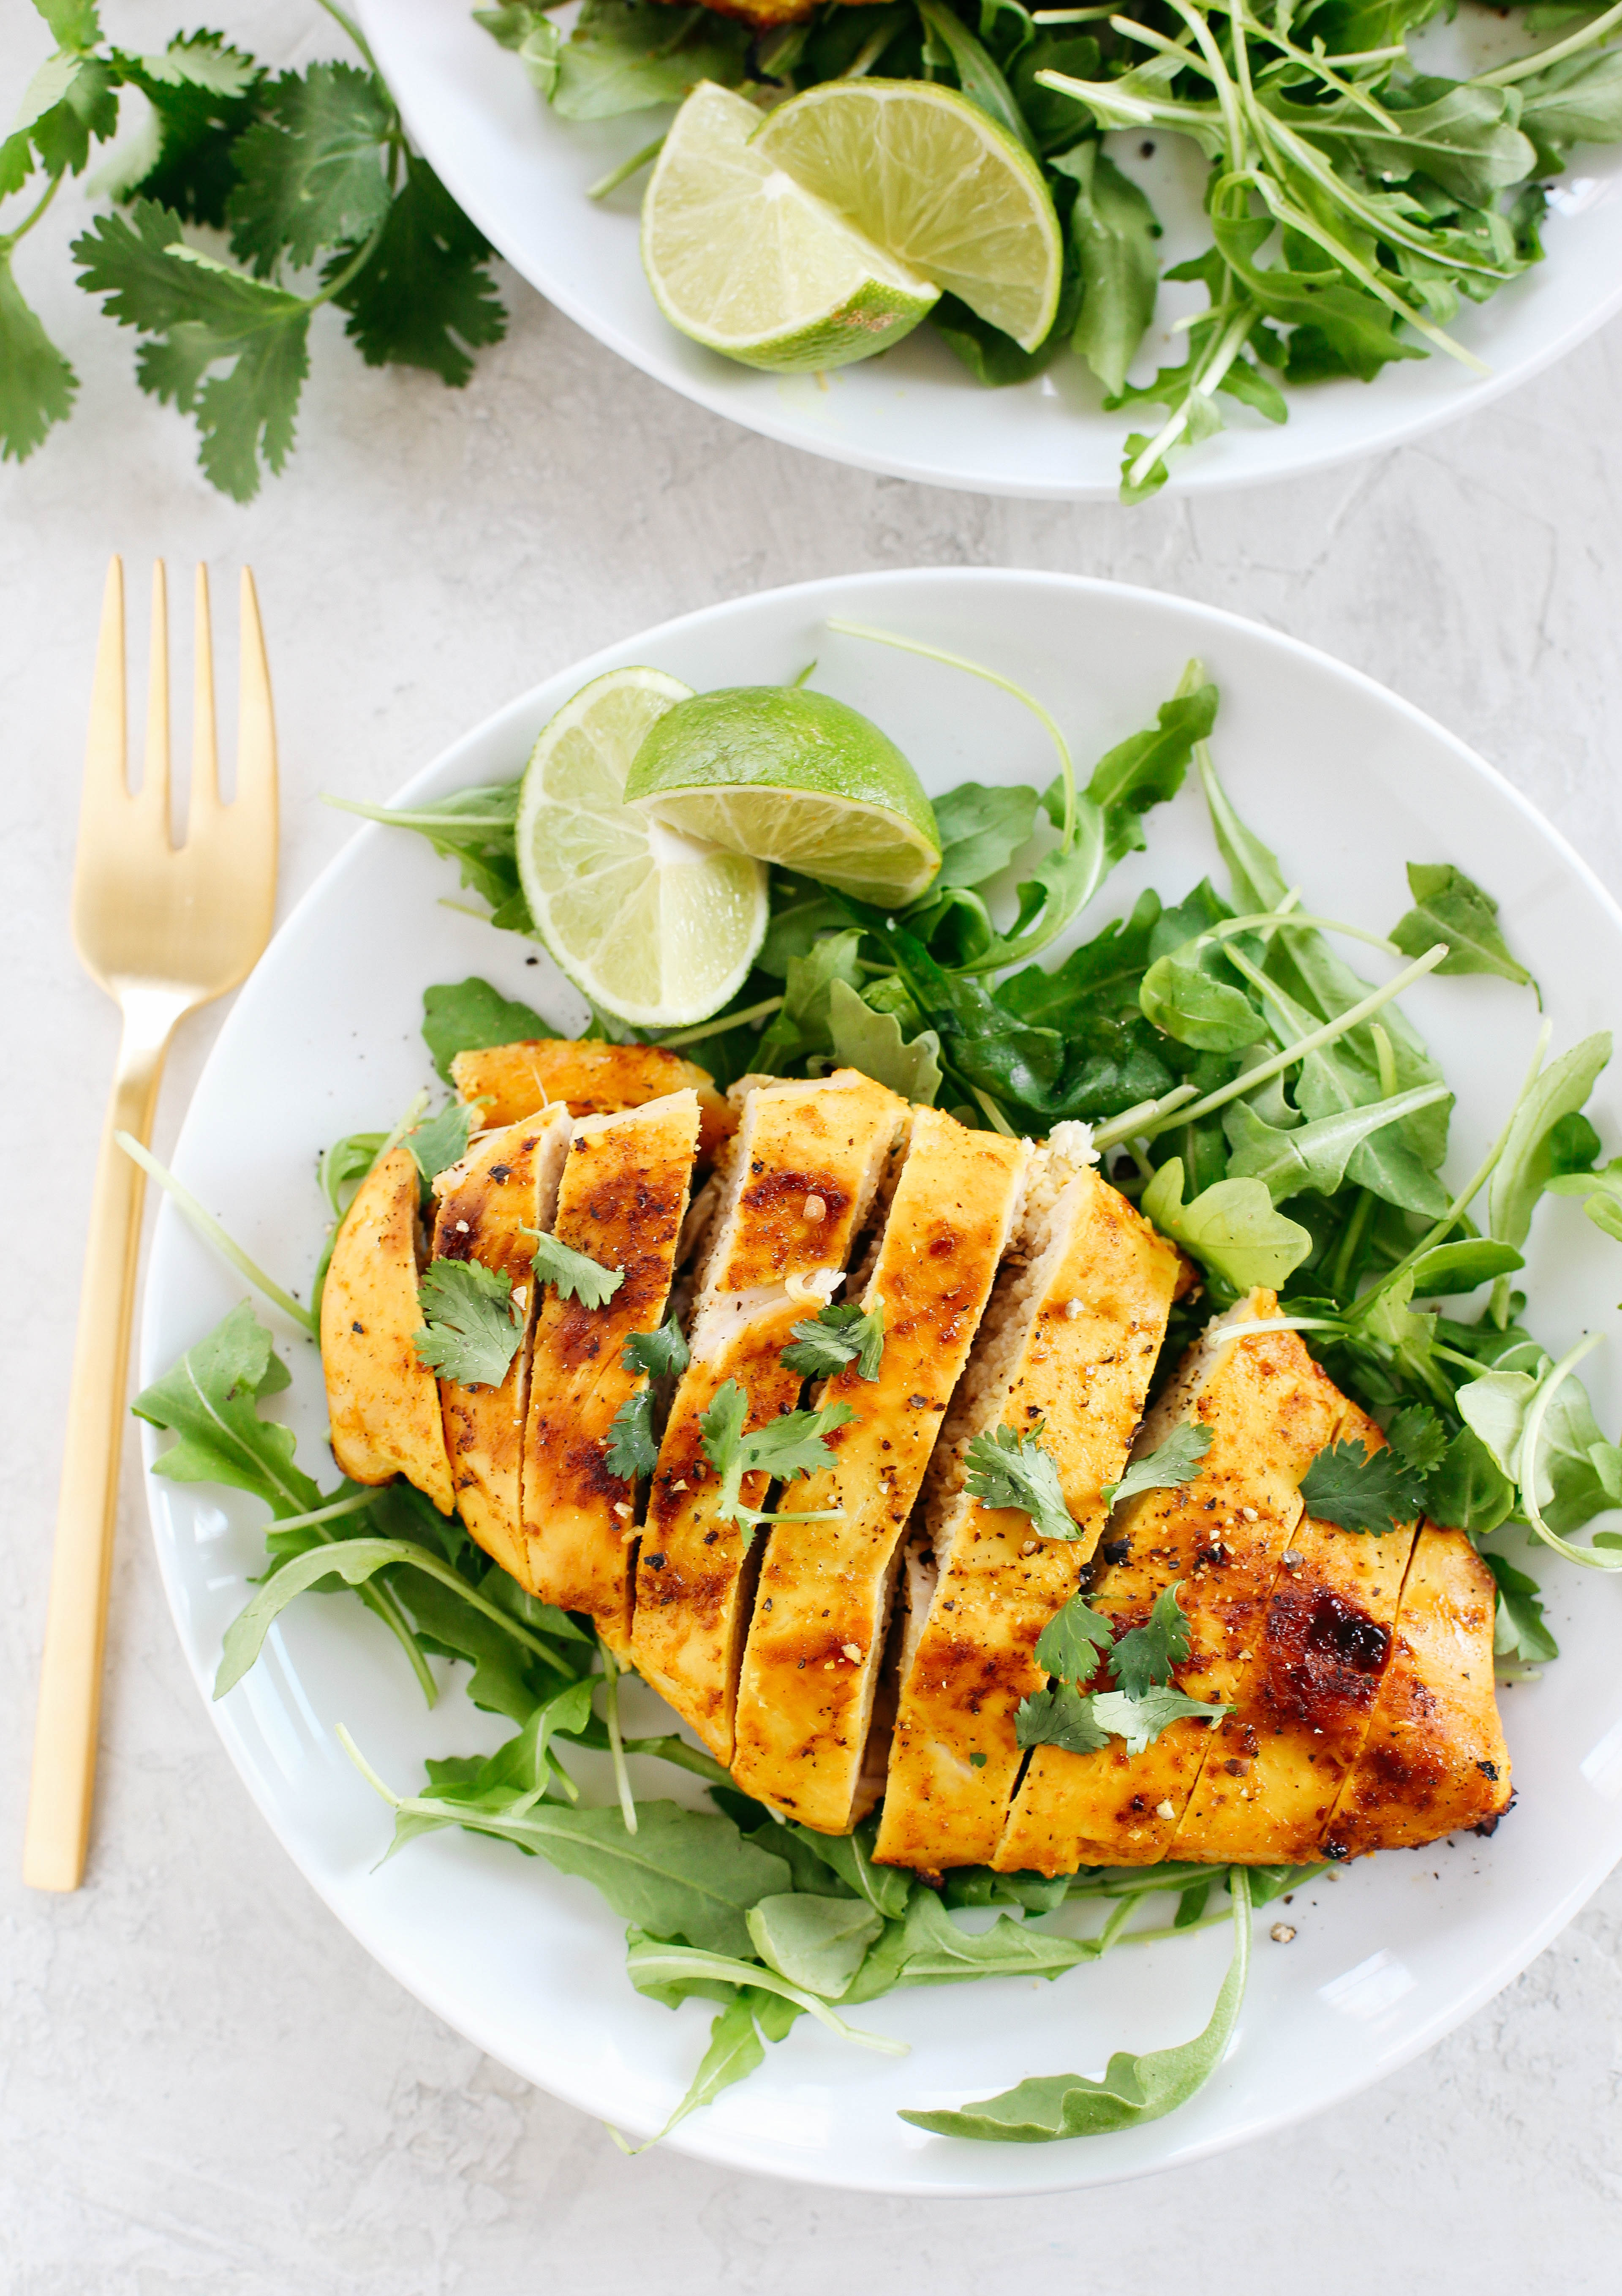 Marinated Turmeric Ginger Grilled Chicken (Whole 30, Paleo, Gluten Free, Dairy Free, Keto, Low Carb) #whole30 #keto #whole30approved